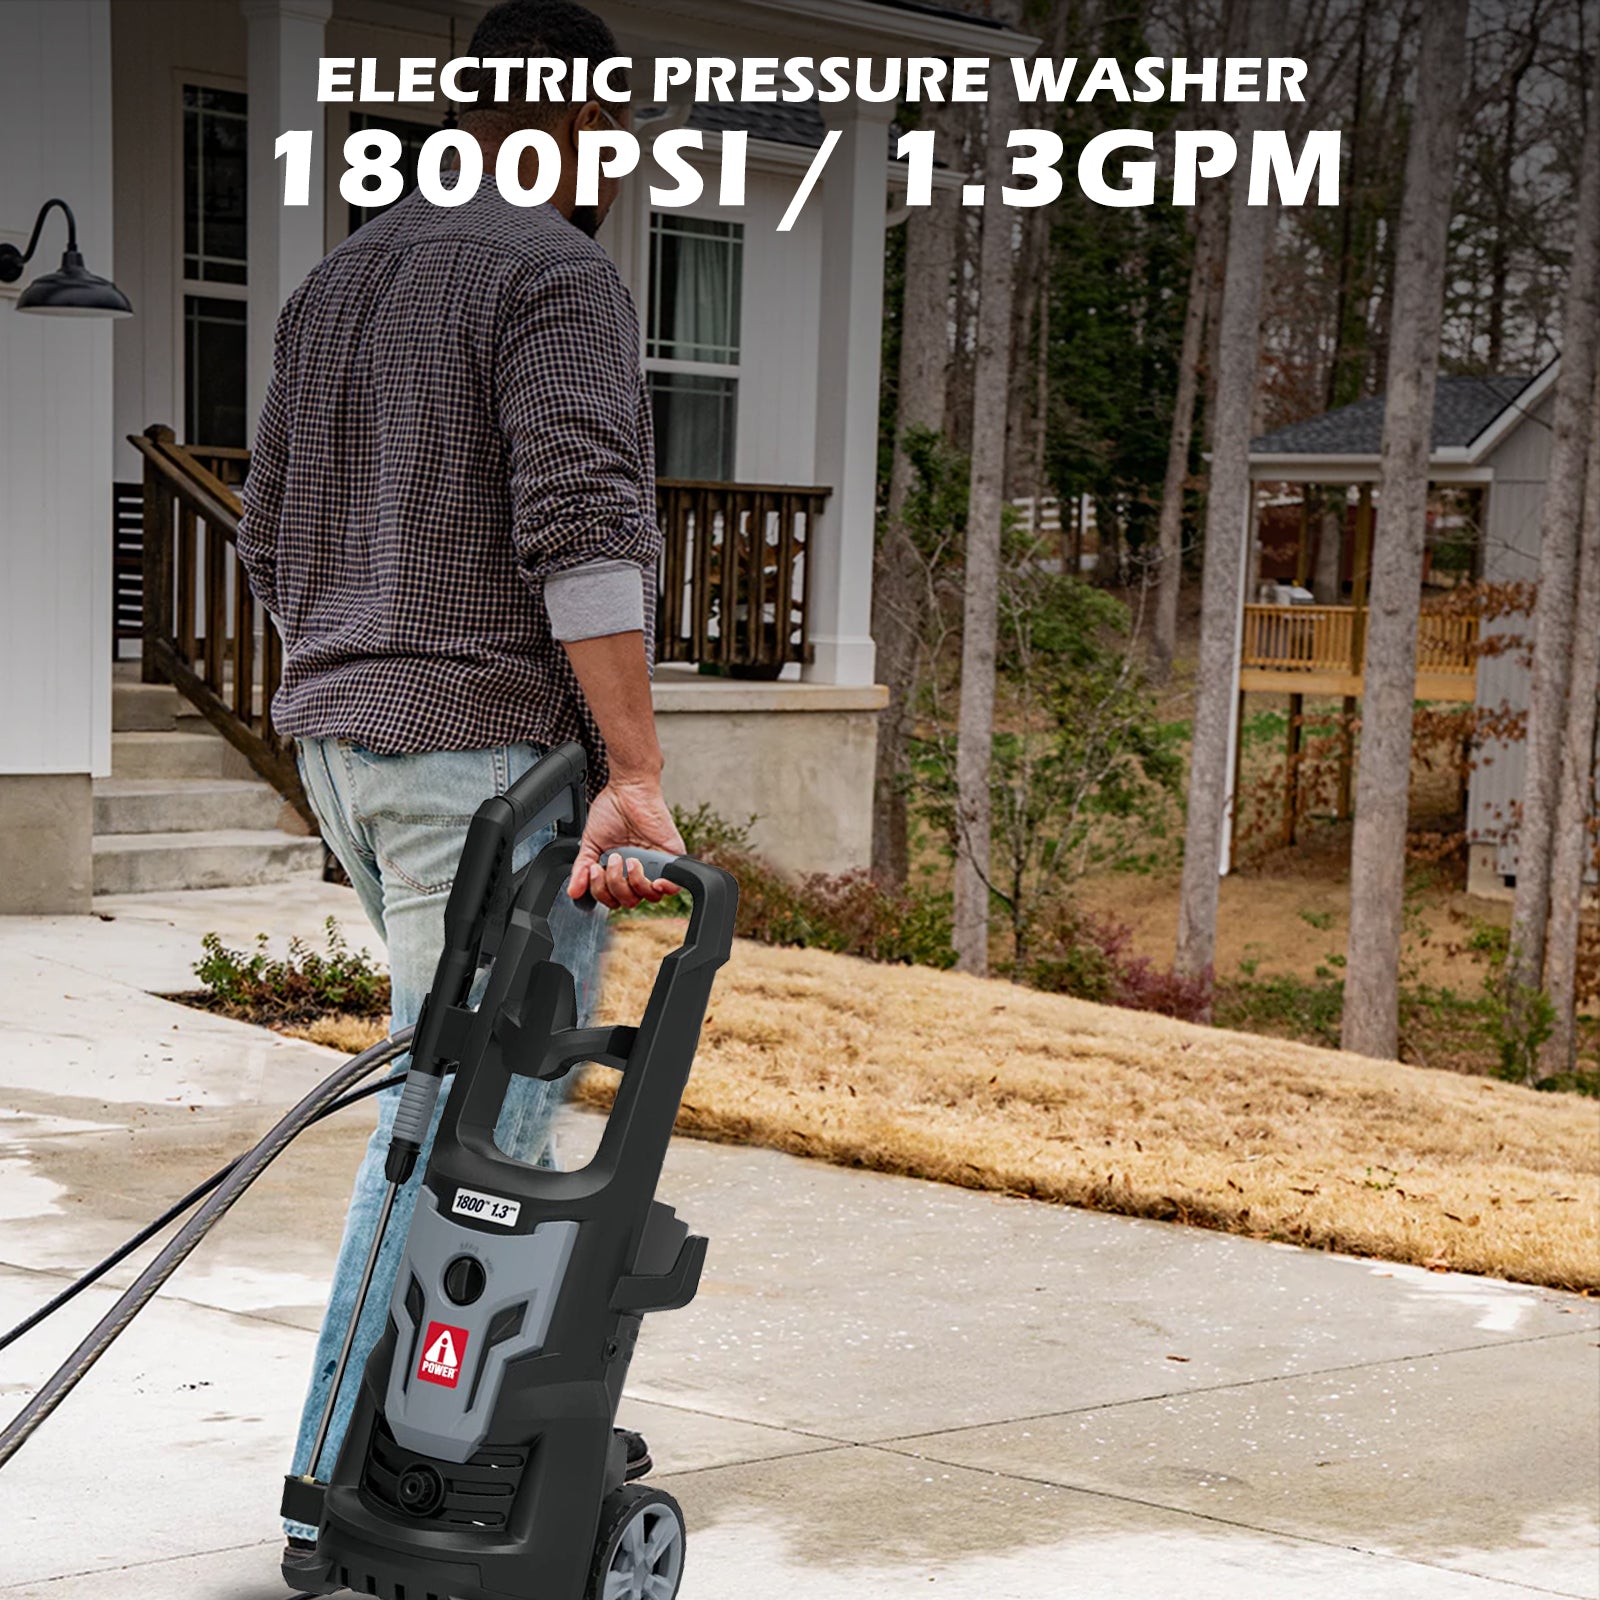 PWE1802 - A-iPower Electric Pressure Washer - Specs.jpg__PID:d36f68d9-6940-4301-af7c-963bc33fa4c1